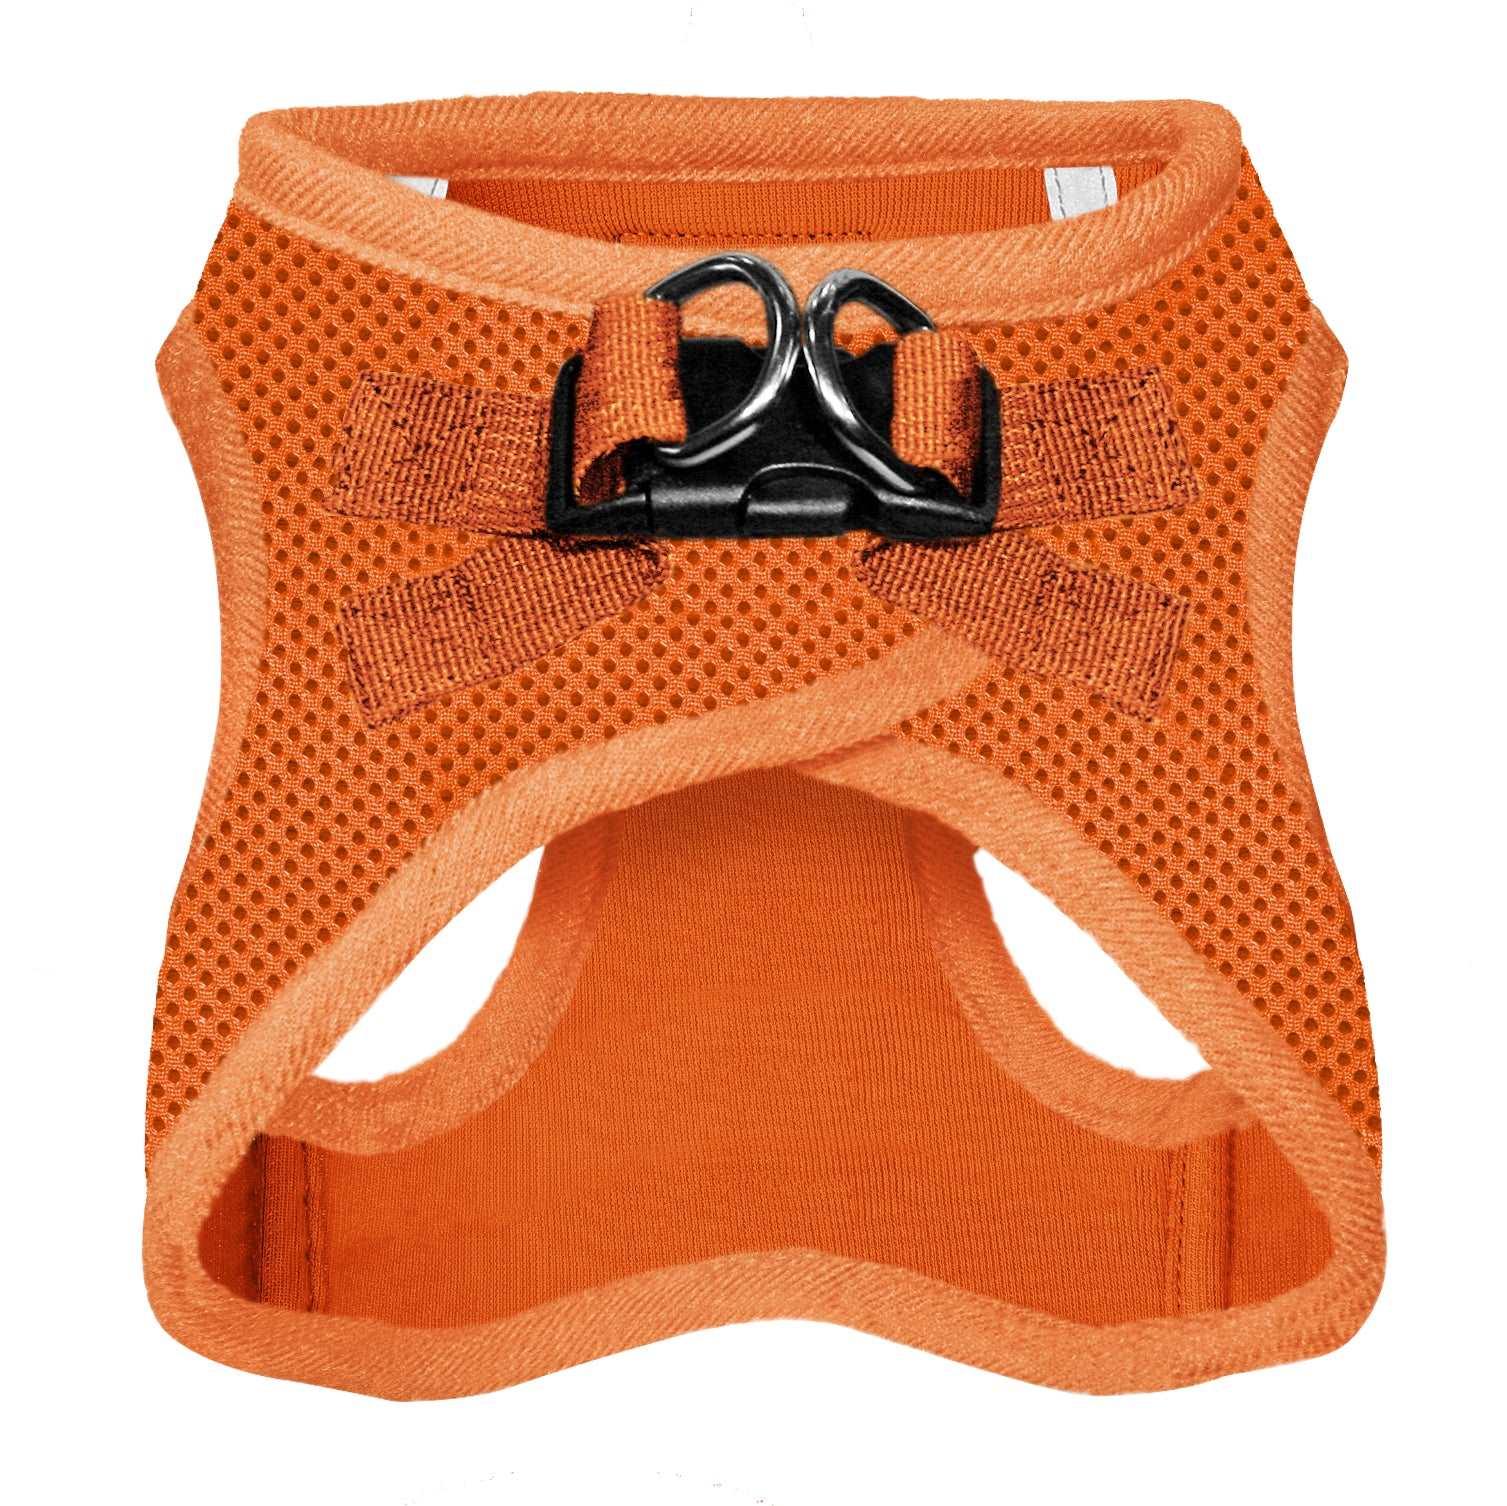 VOYAGER Step-In Air Pet Harness in Orange with Matching Trim and Webbing - Black